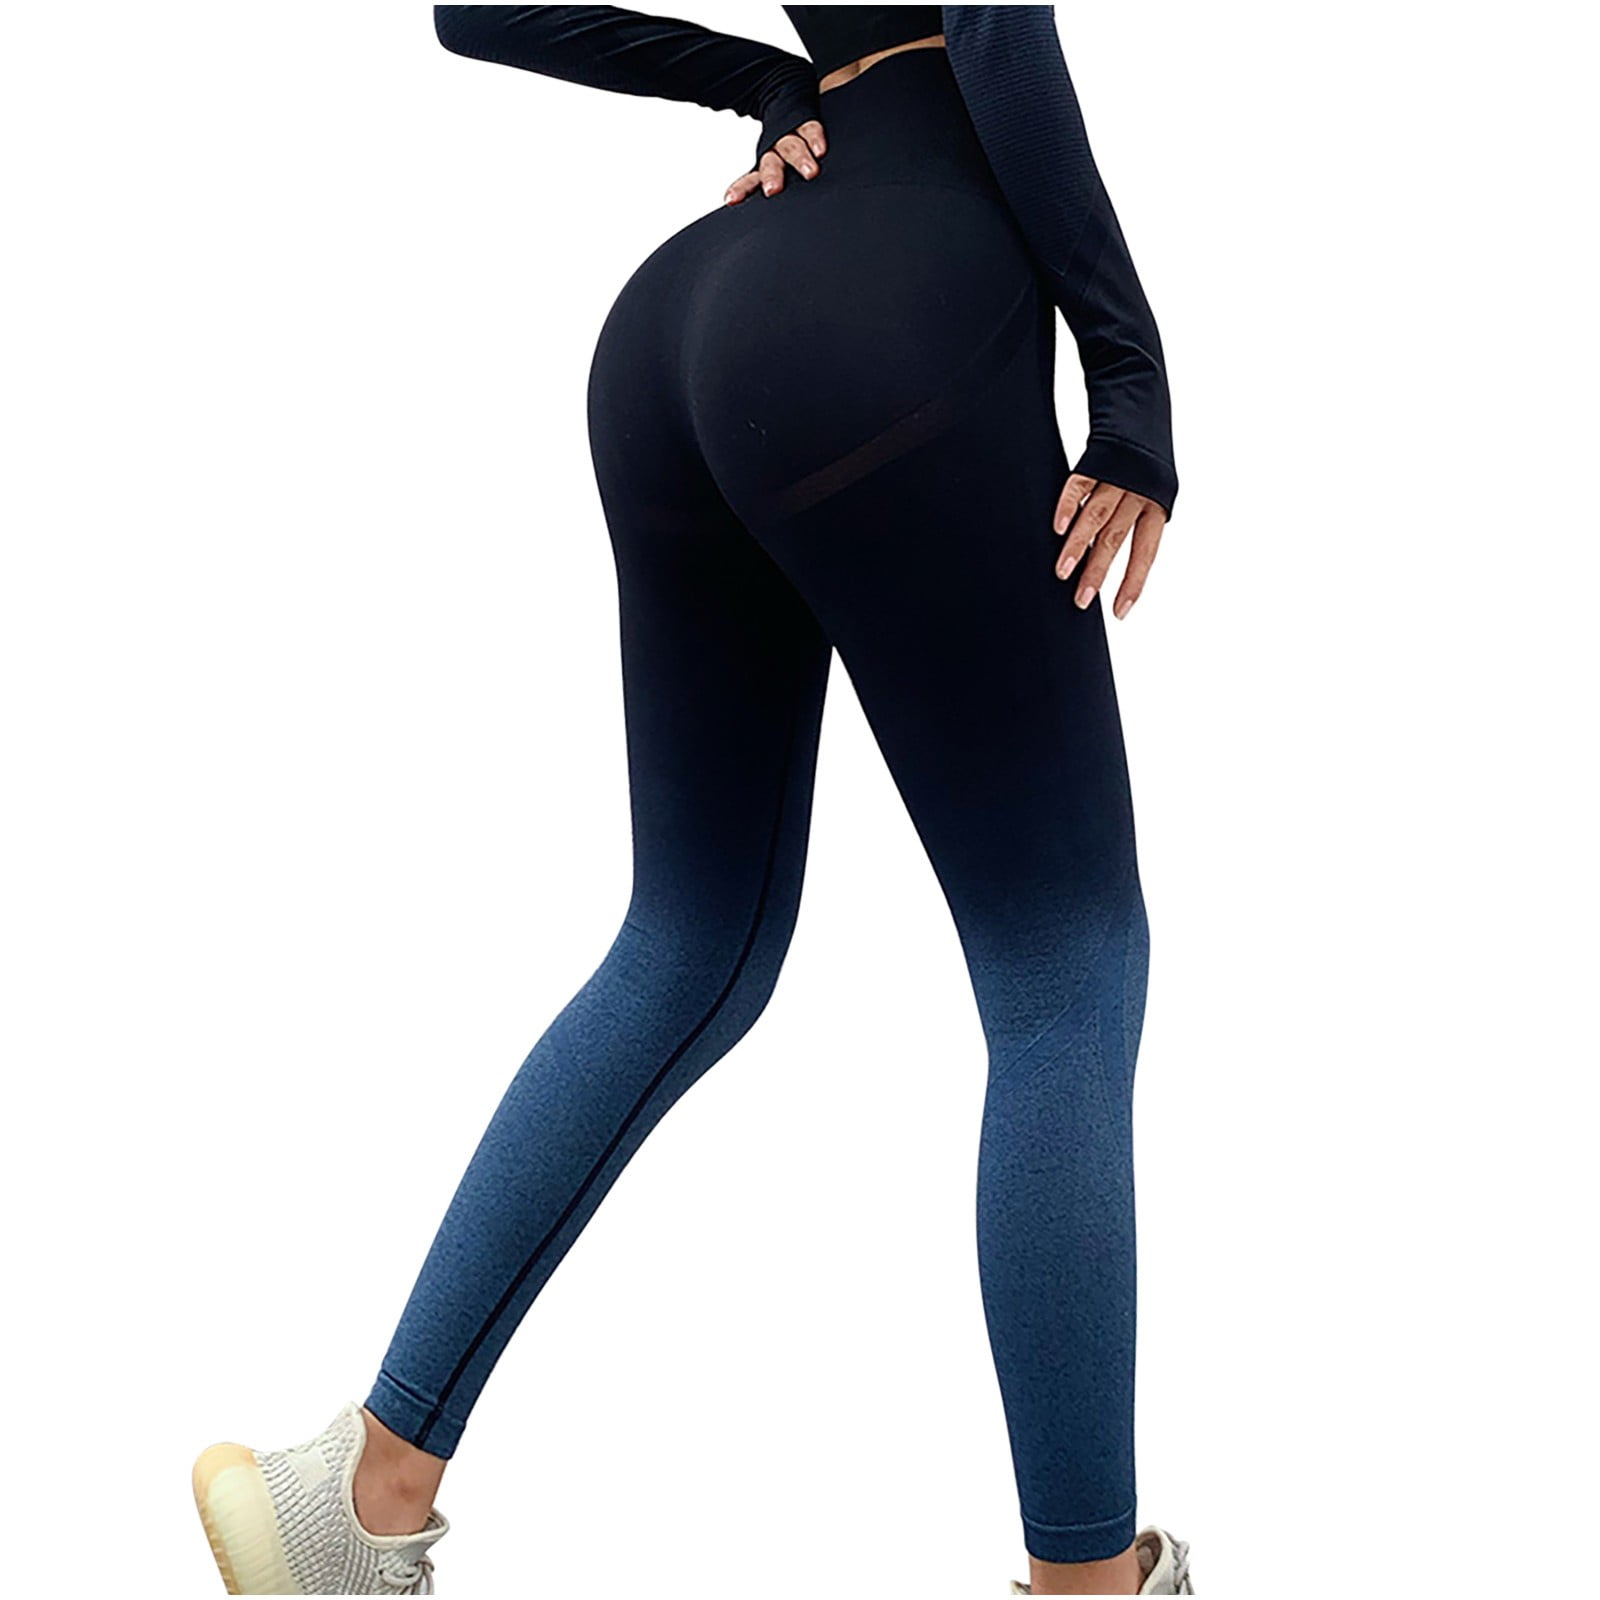 Melody Fitness Trousers Navy Sports Leggings Push Up Gym Yoga Pants For  Women Tight Compression Knit Leggings Sexy Hip Pants - Yoga Pants -  AliExpress